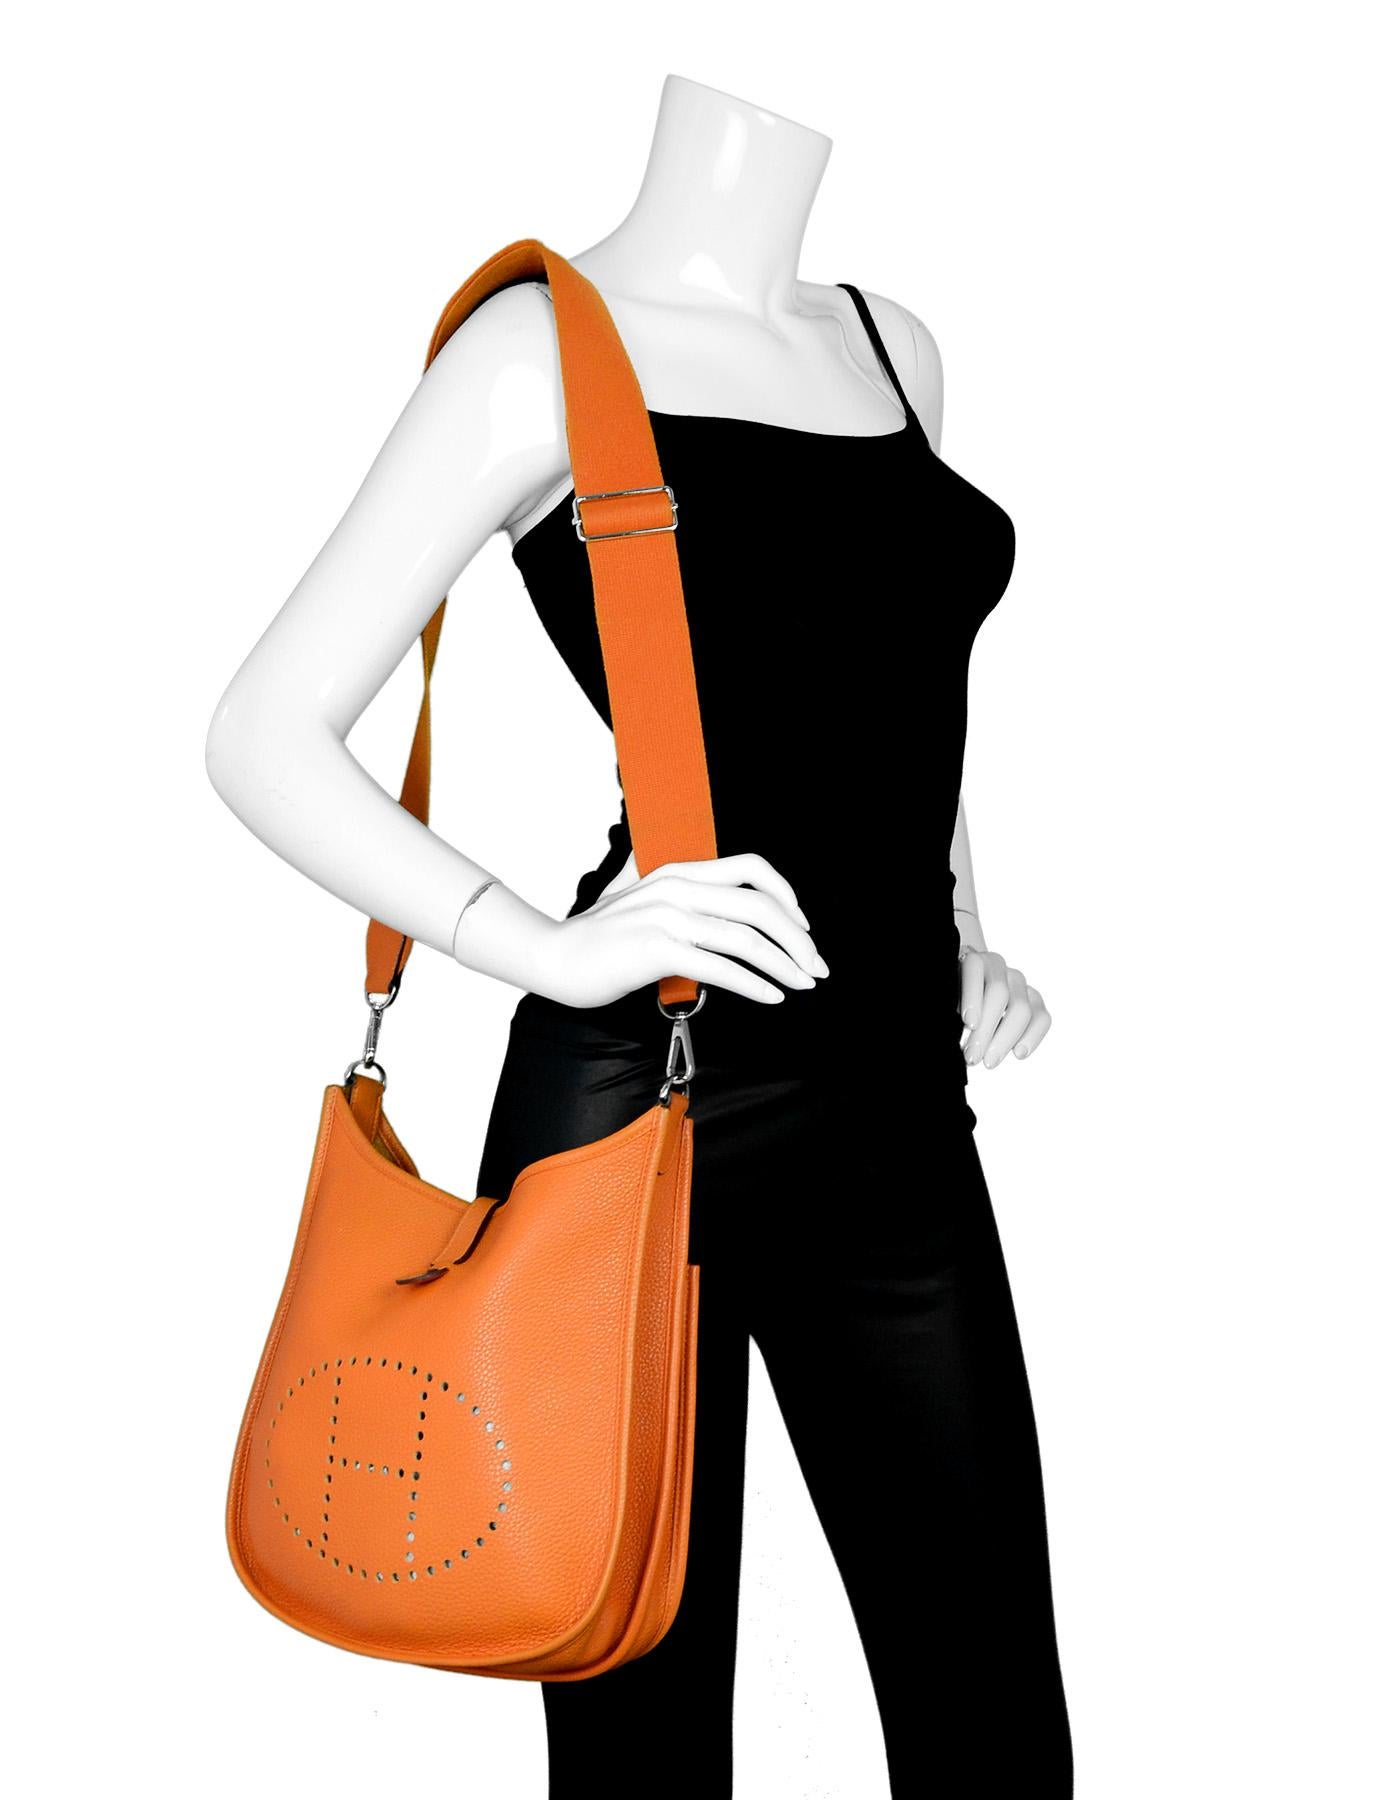 Hermes Orange Clemence Leather Evelyne III PM Messenger Crossbody Bag With Perforated H Icon In Circle On Front

Made In: France
Year Of Production: 2011
Color: Orange
Hardware: Palladium 
Materials: Clemence leather 
Lining: Orange